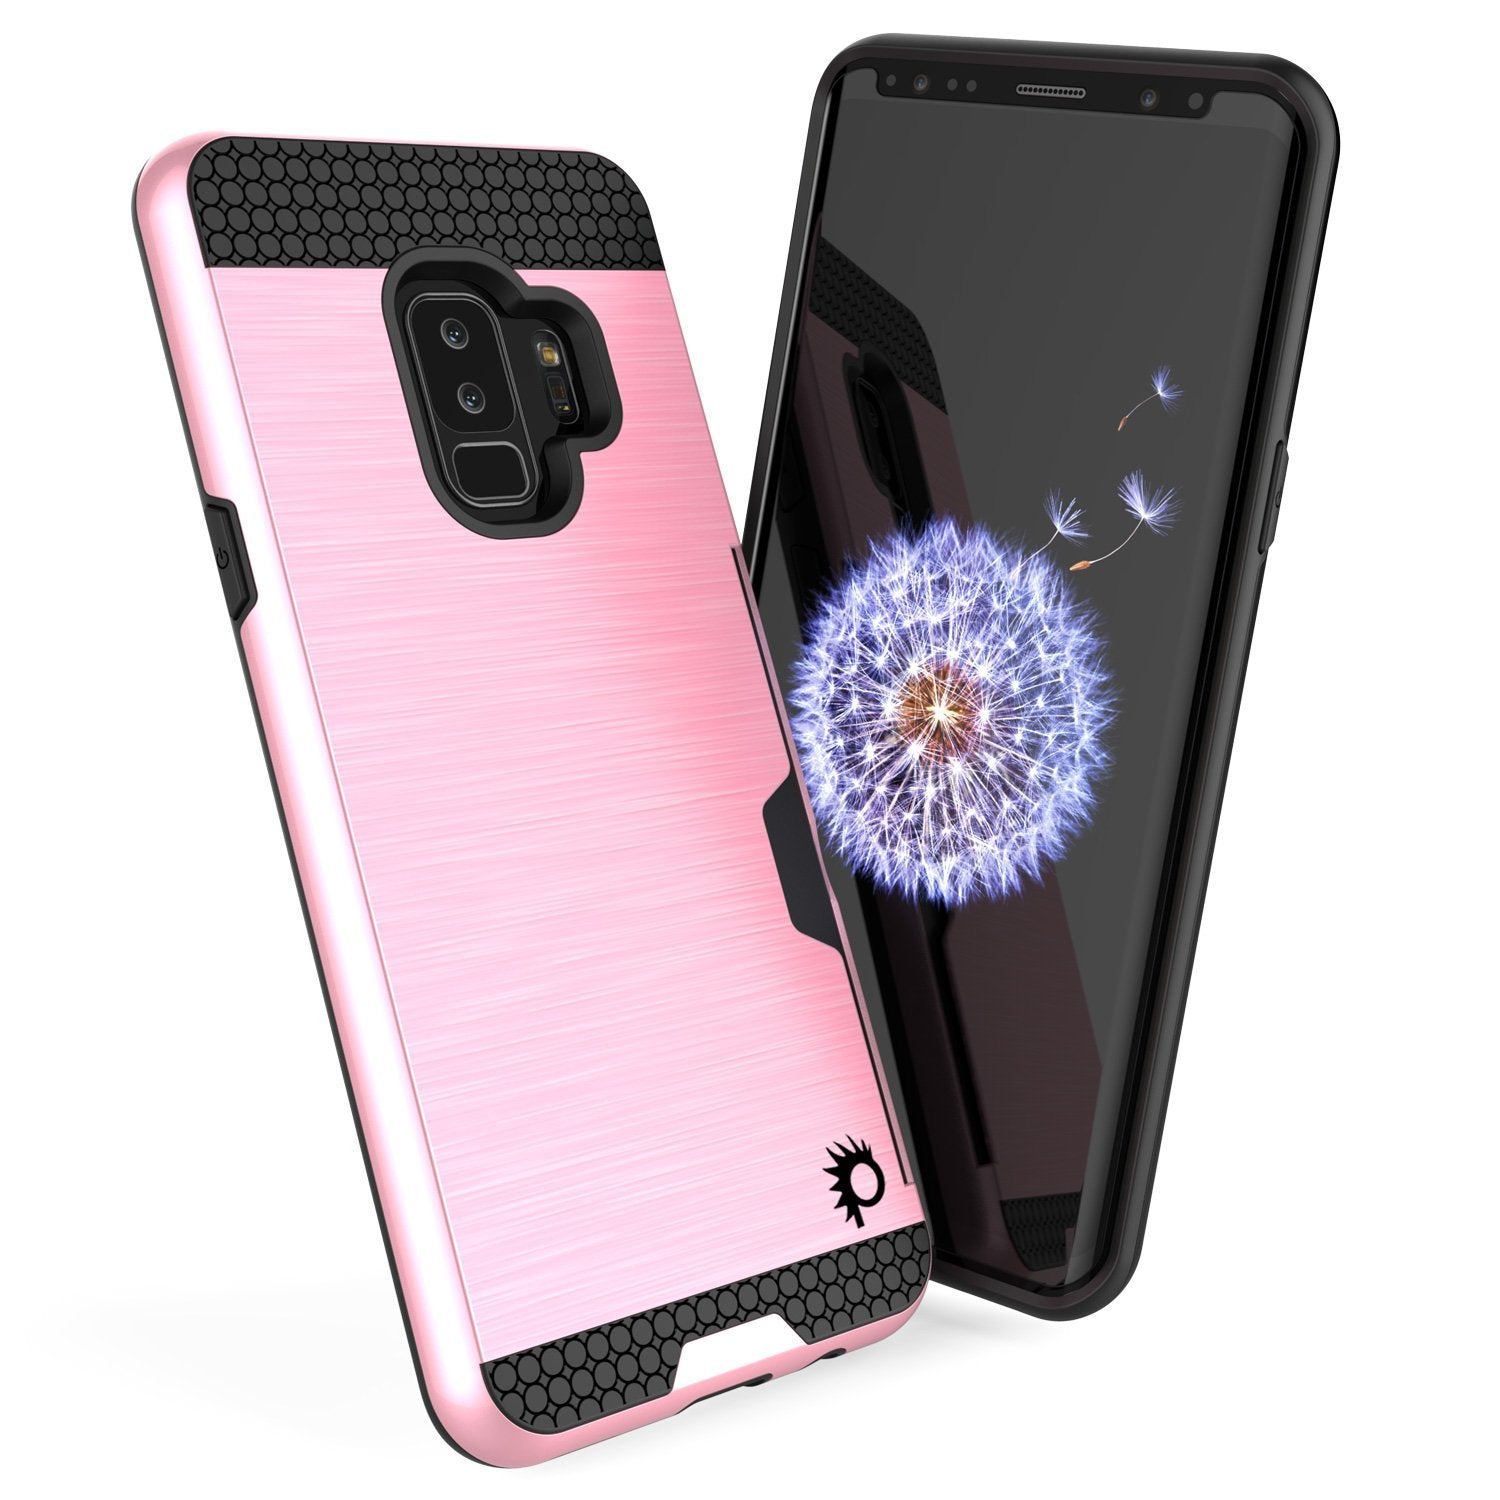 Galaxy S9 Plus Case, PUNKcase [SLOT Series] [Slim Fit] Dual-Layer Armor Cover w/Integrated Anti-Shock System [Pink]